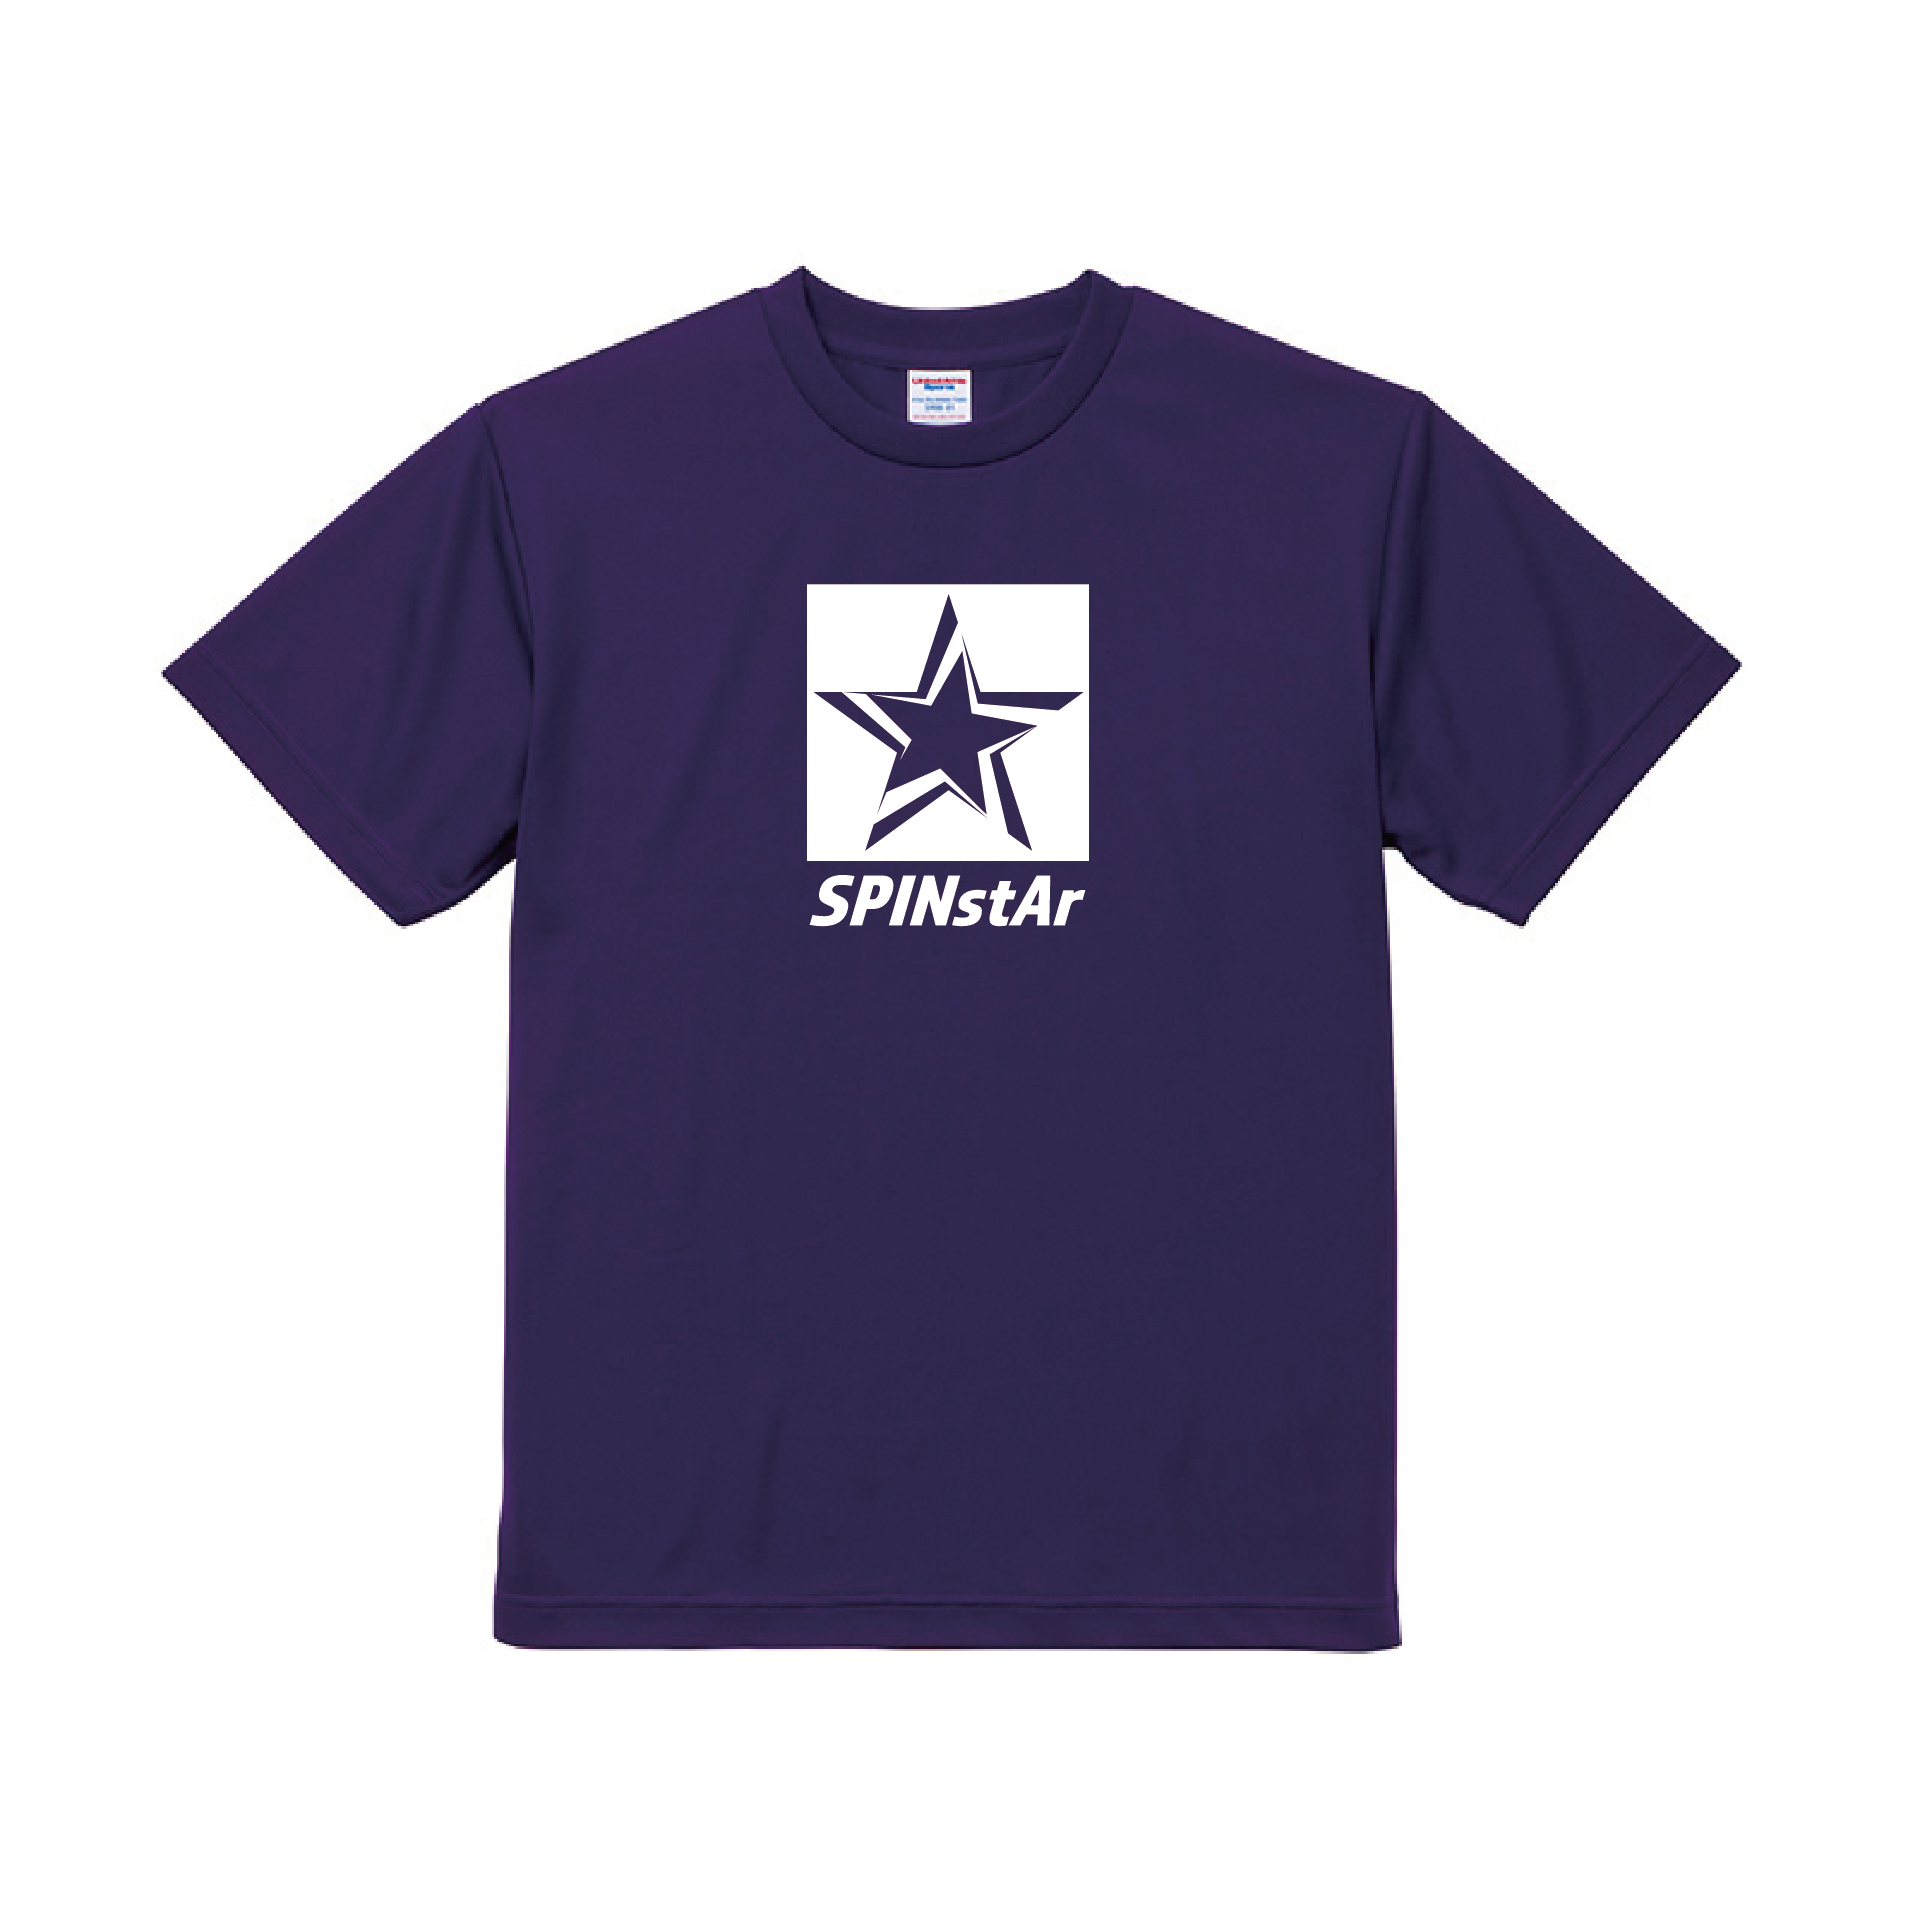 SPIN stAr T-shirts - SPIN stAr